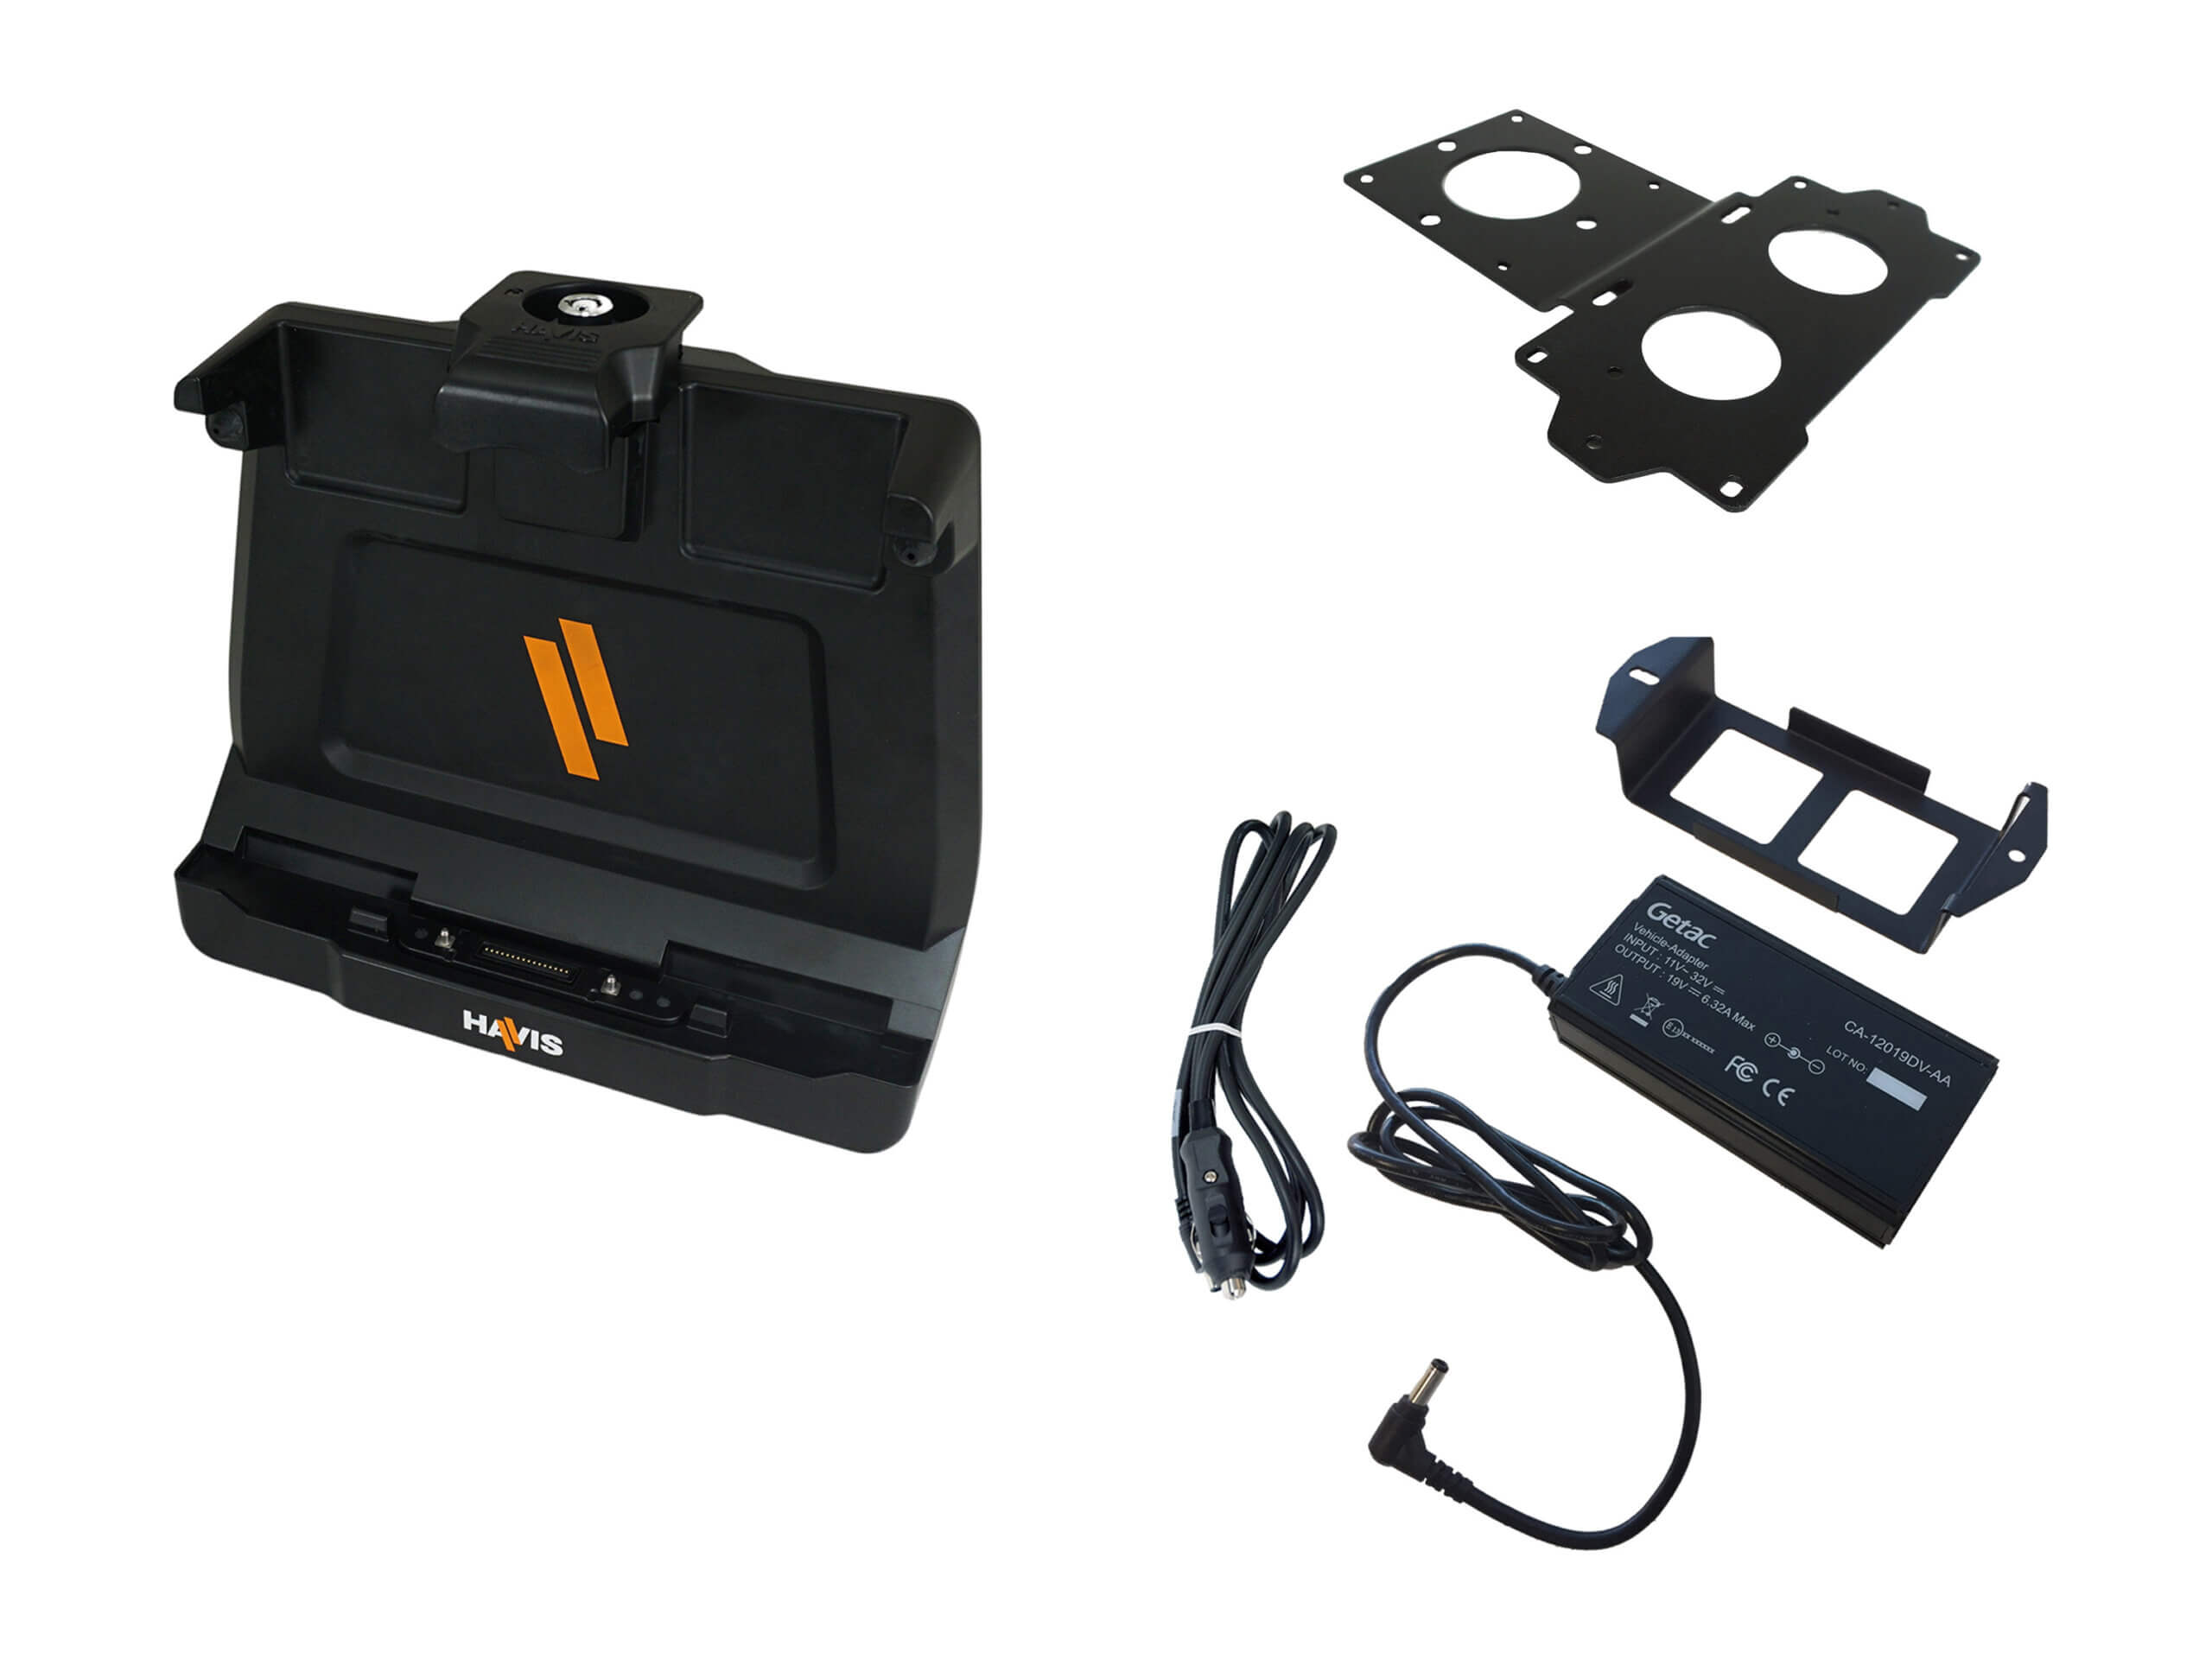 Package – Docking Station for Getac ZX10 Tablet With External Power Supply & Power Supply Mounting Bracket